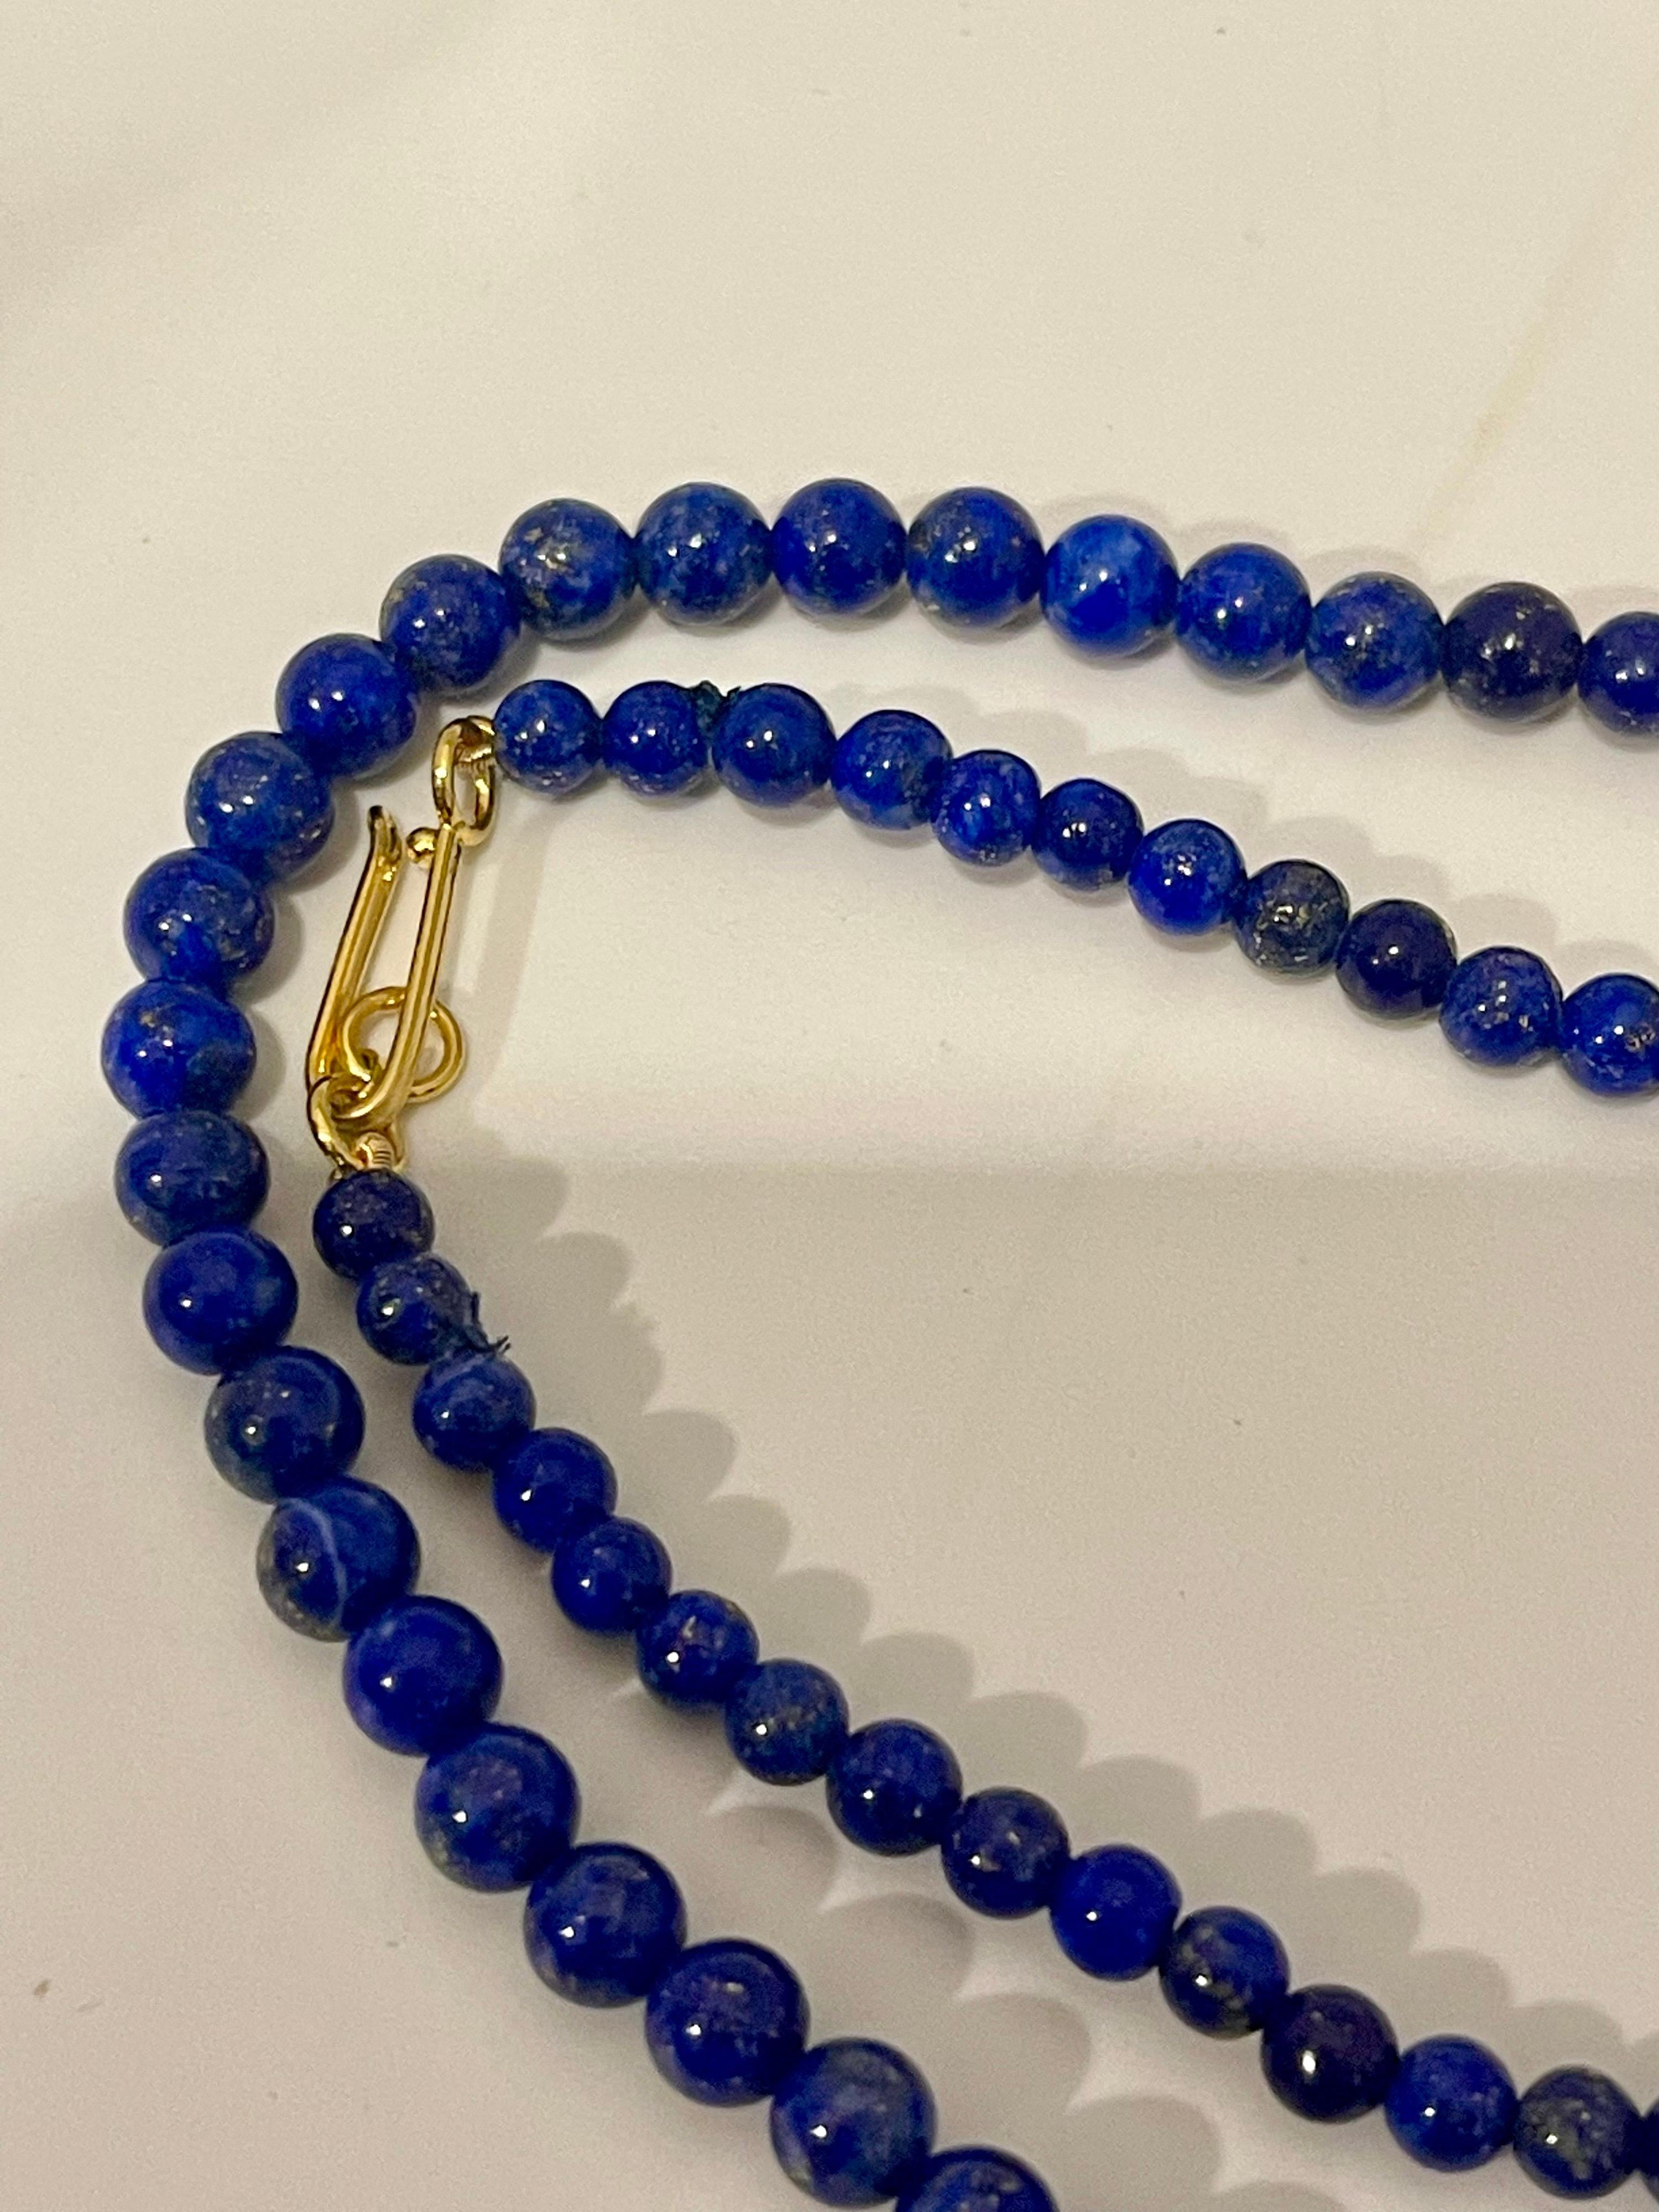 Vintage Lapis Lazuli Single Strand Necklace With 14 Karat Yellow Gold heavy yellow gold Hook clasp
This marvelous vintage Lapis Lazuli Graduating necklace features 1 row of luscious Beads
measuring approximately 5 to 6 mm Beads
strand is 20 inches